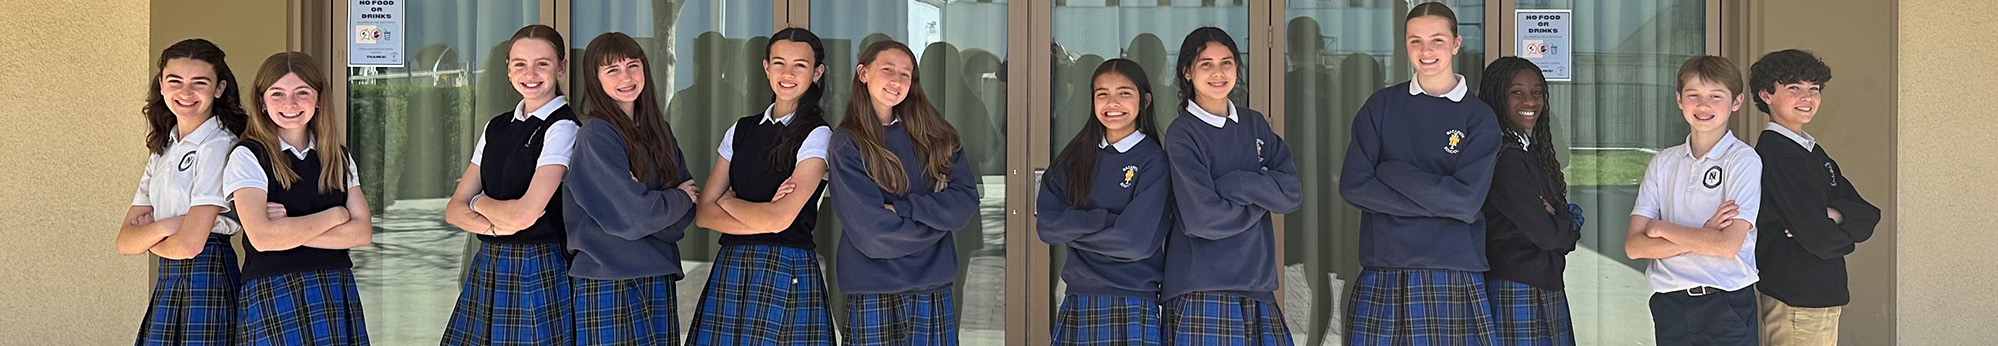 Four happy students welcoming you to Nazareth School